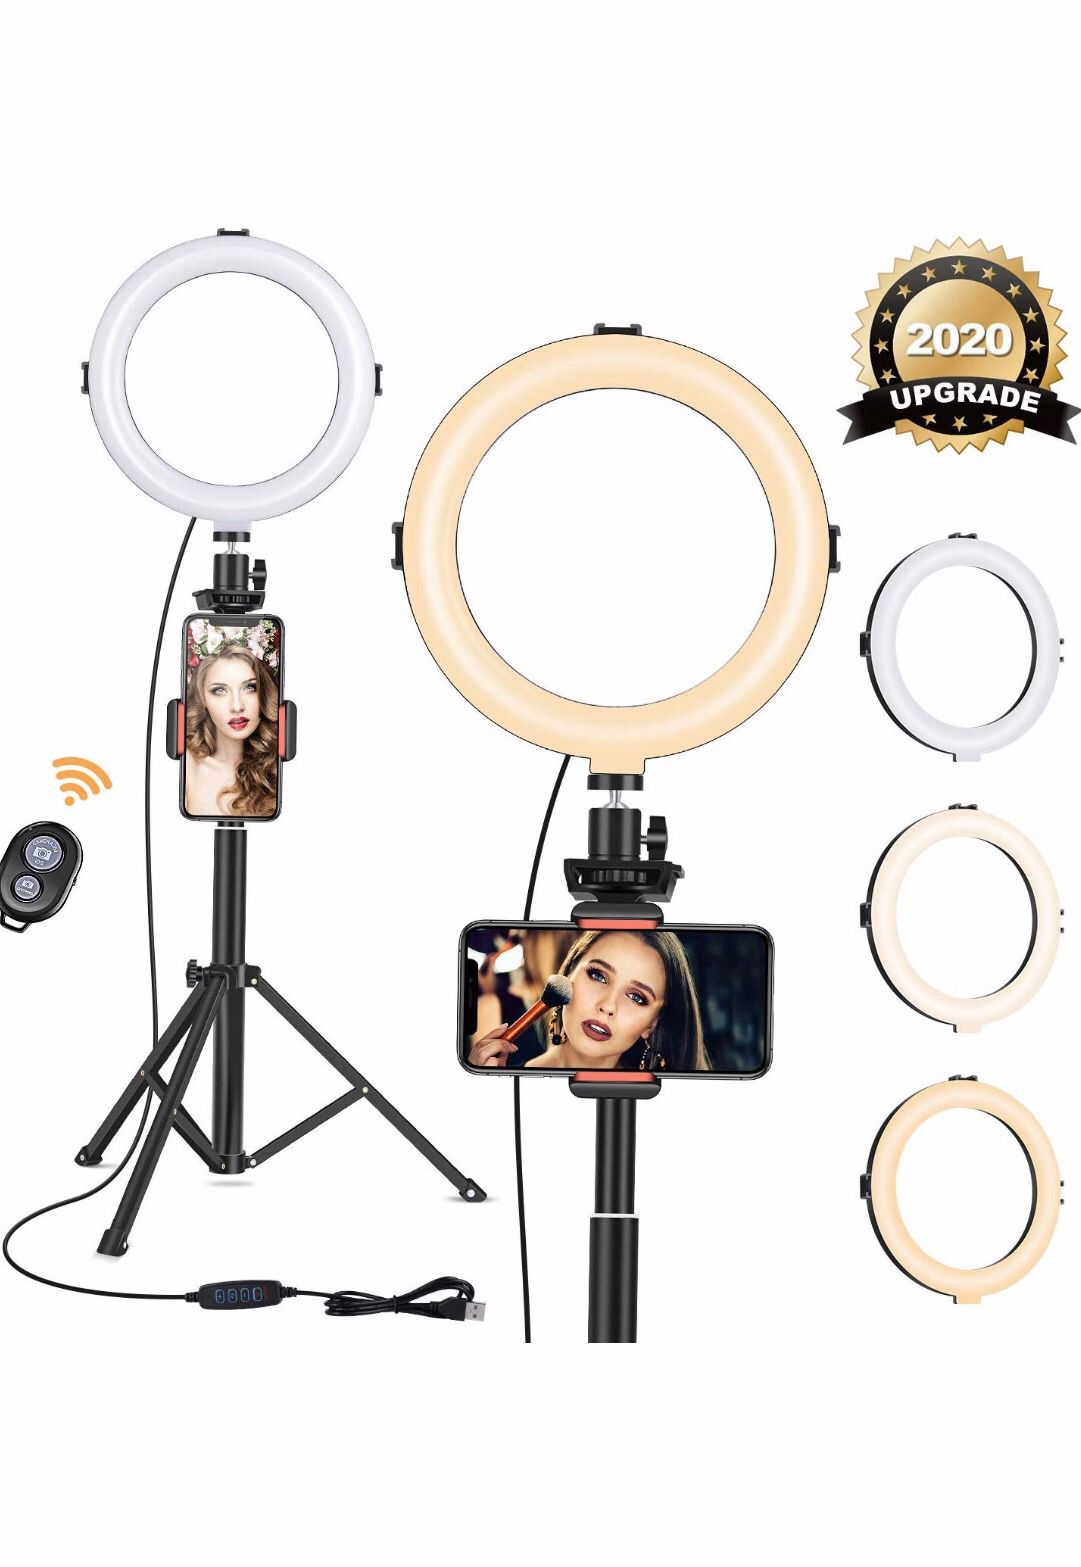 8" Ring Light with Tripod Stand - Dimmable Selfie Ring Light LED Camera Ringlight with Tripod and Phone Holder for Live Stream/Makeup/YouTube Video,